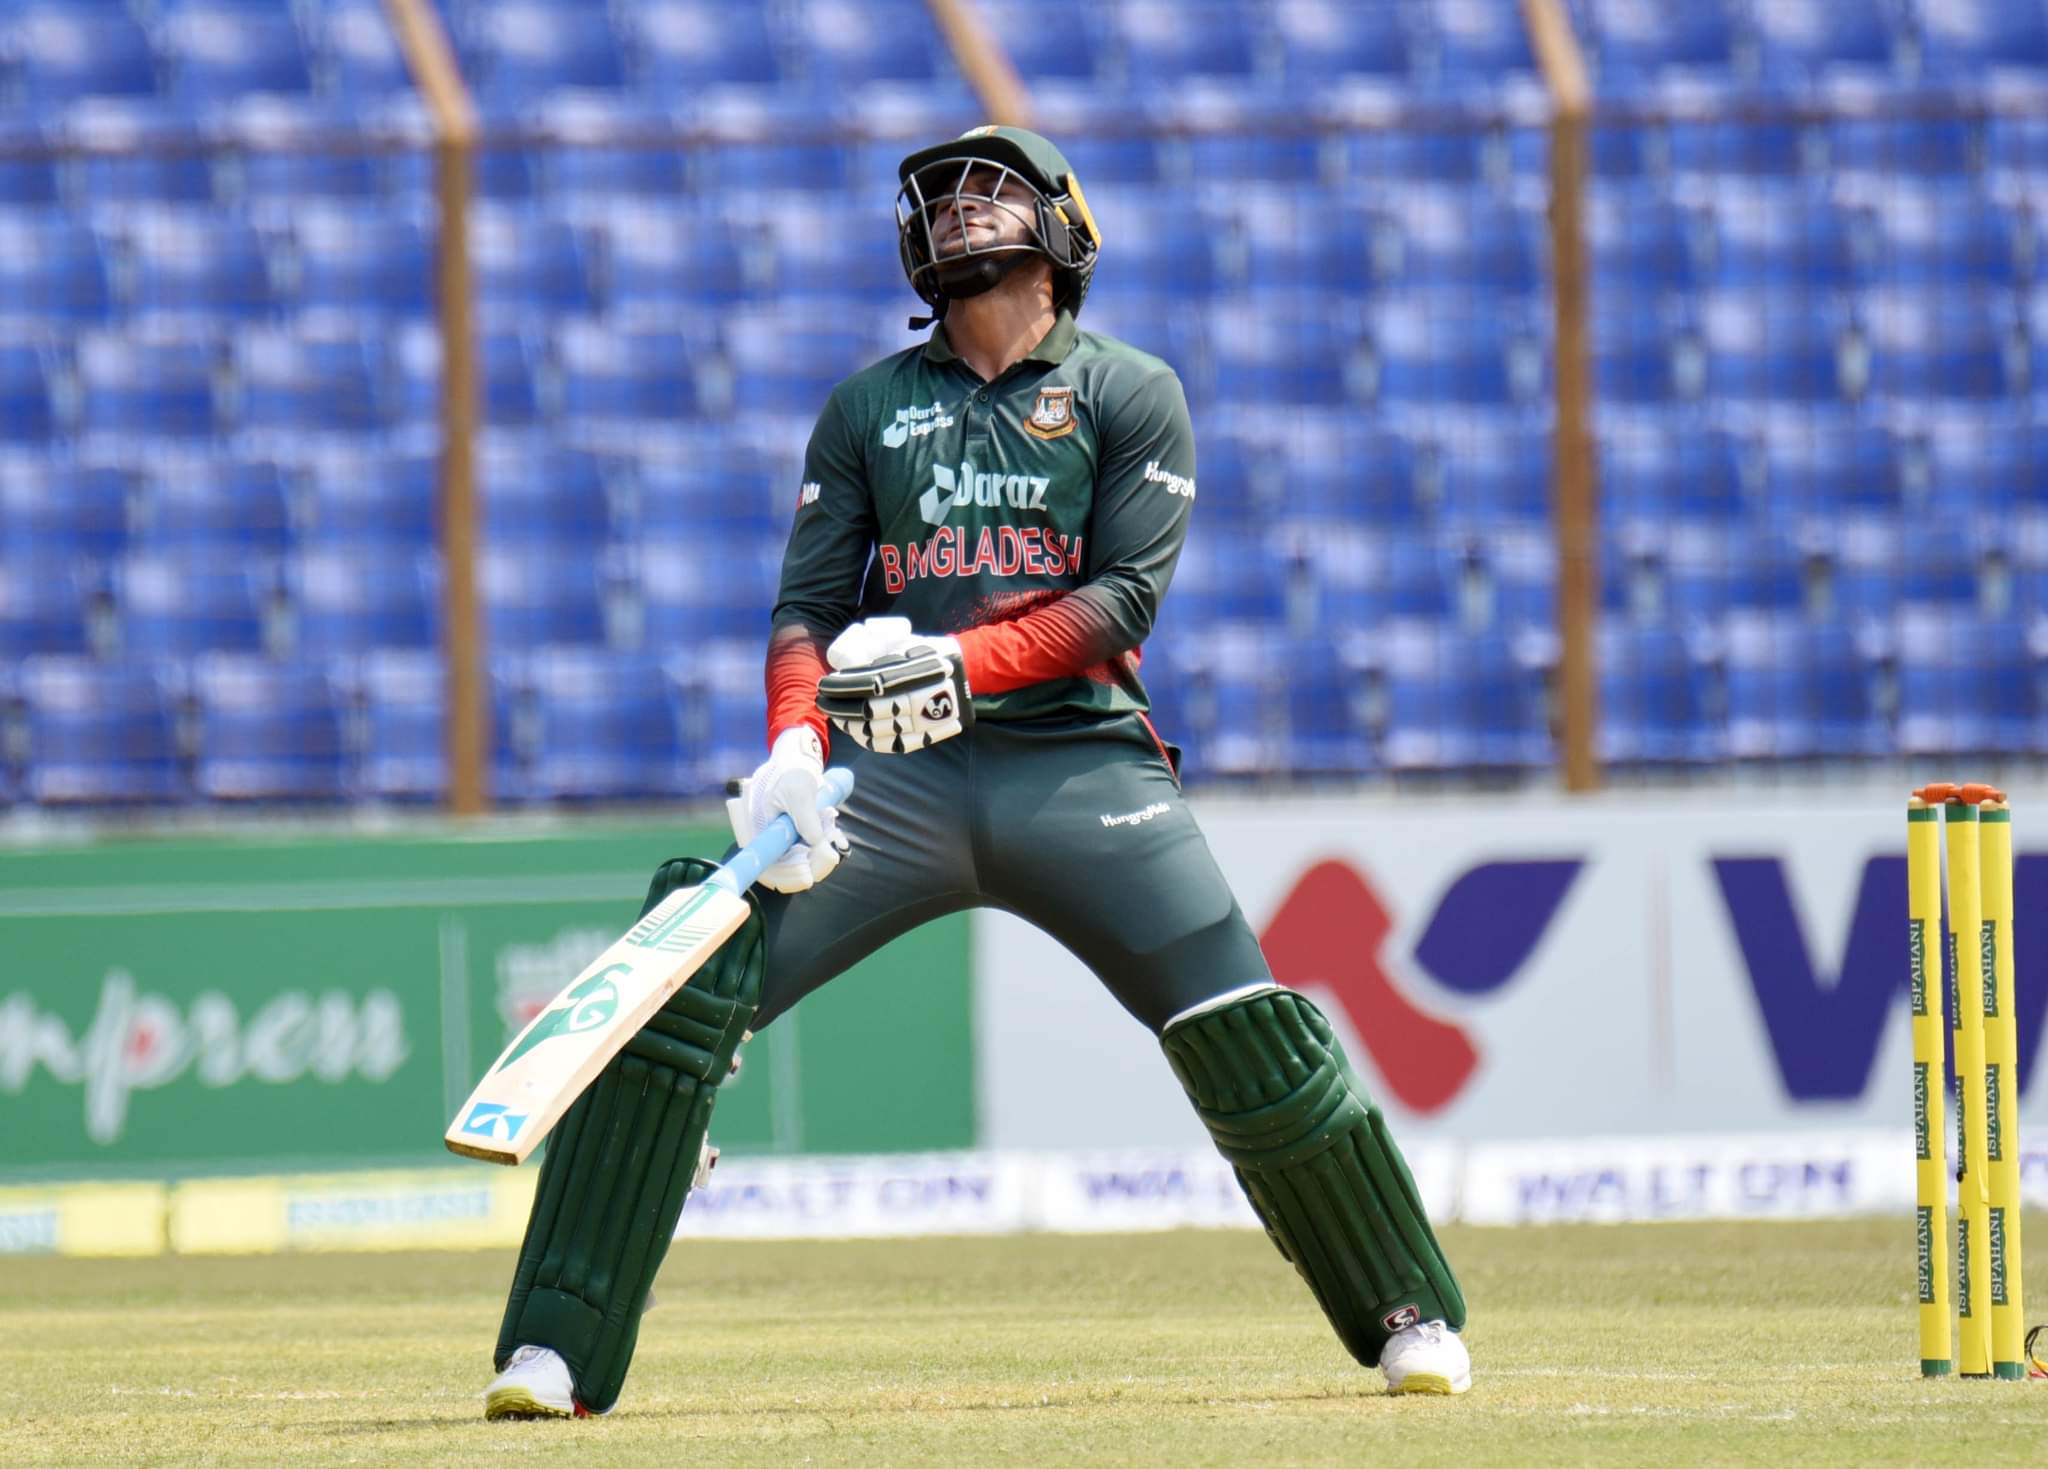 Shakib Al Hasan is disappointed after losing his wicket Cricket Photos Latest Cricket images BDCricTime